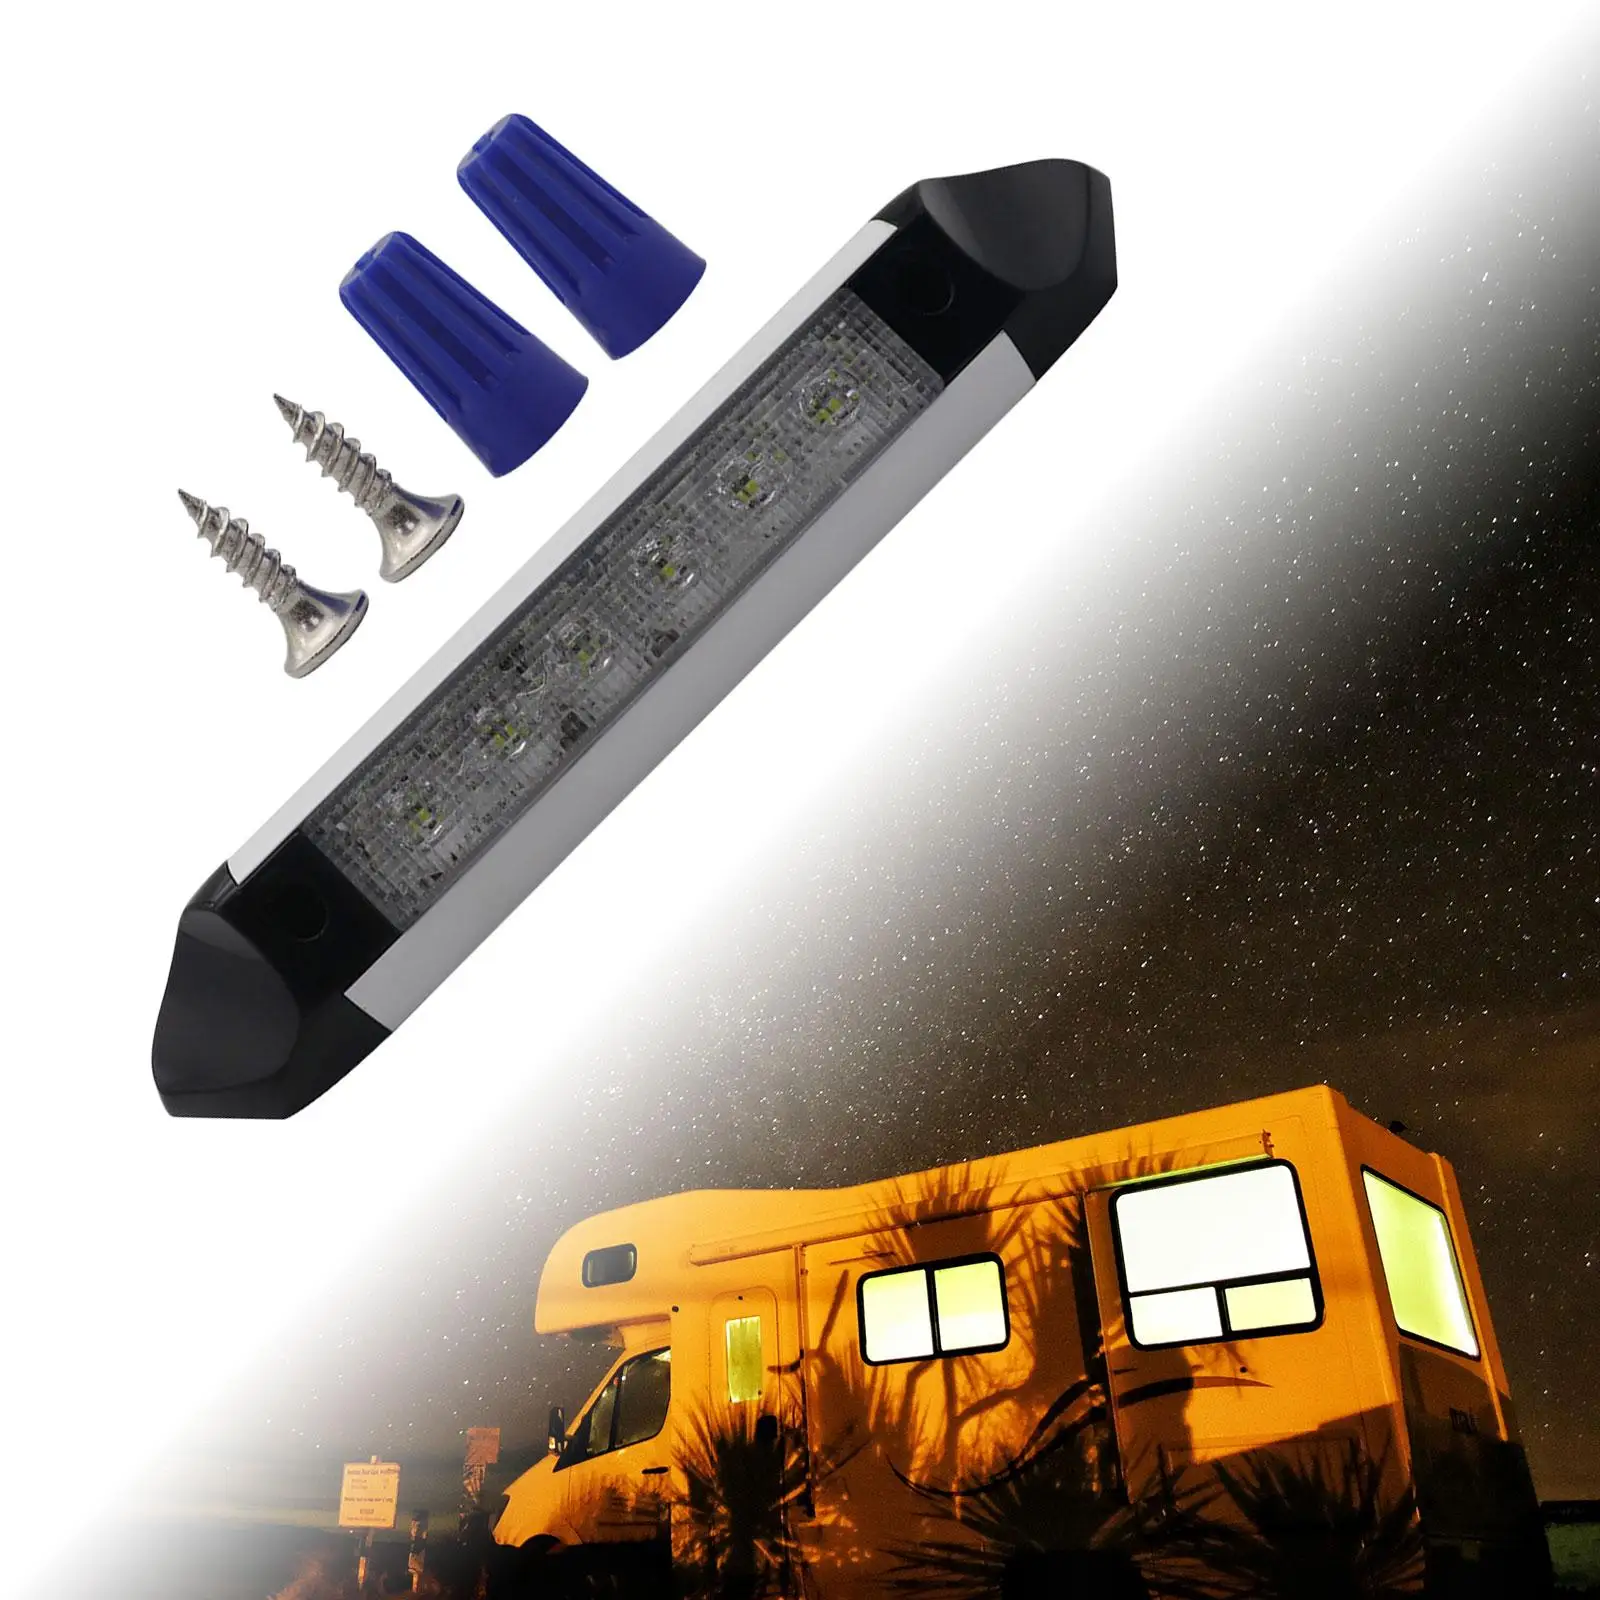 LED Lamp Low Power Consumption RV Ceiling Light for Truck Boat Yacht